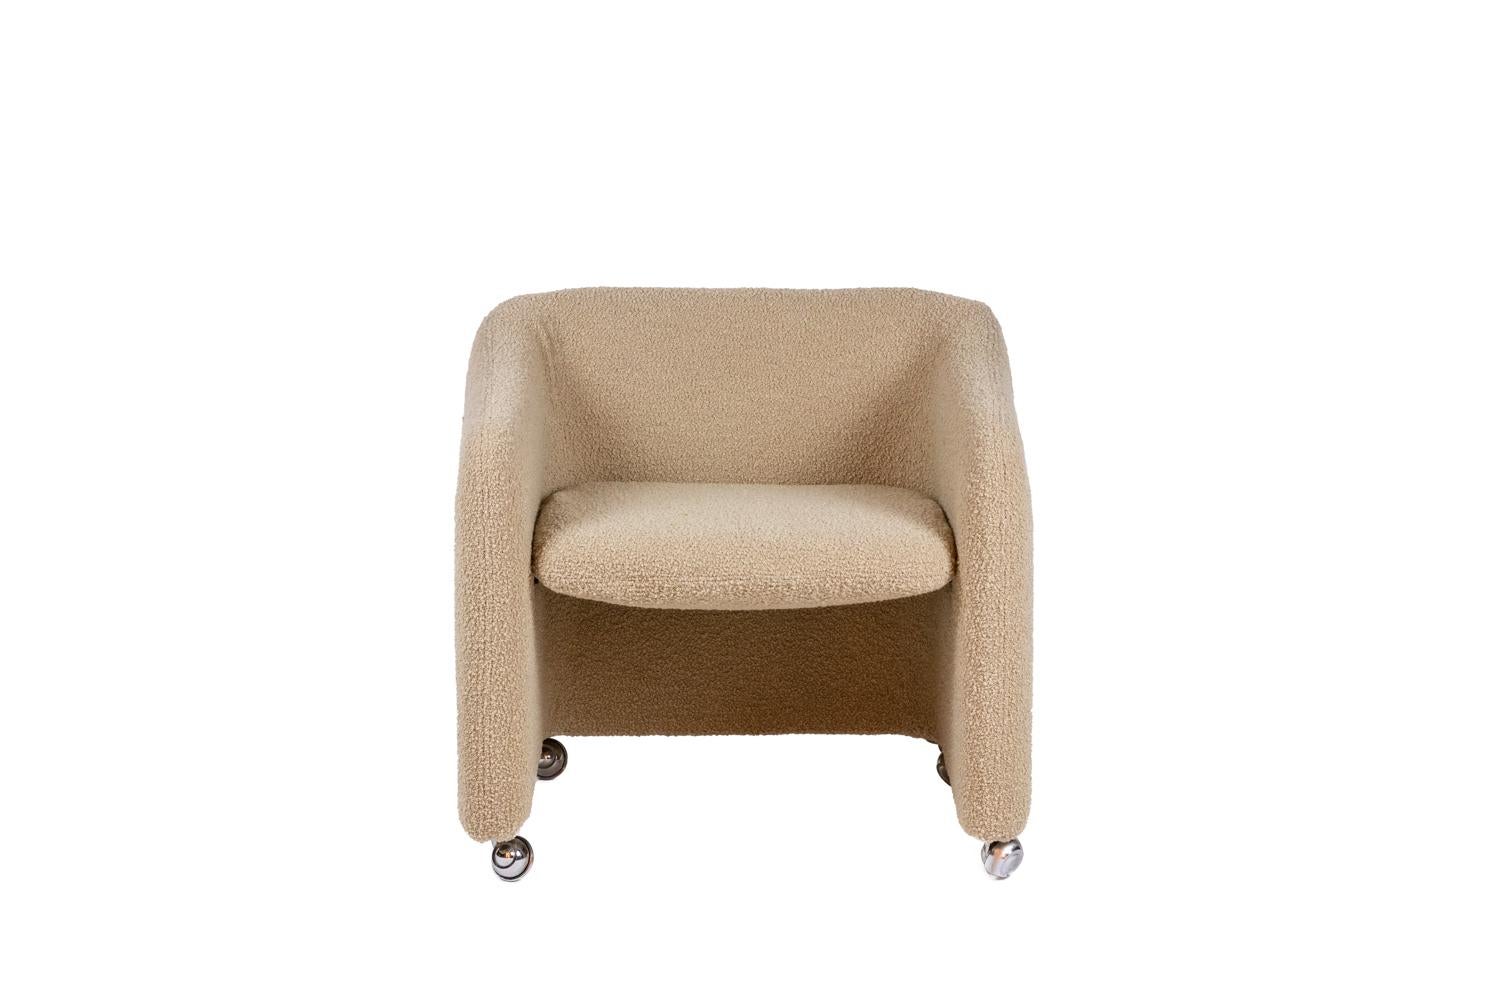 Pair of armchairs in curly imitating sheepskin, beige in color and square in shape. Two padding on the back of the file. Armrests standing on four circular stainless steel roller feet.

Work realized in the 1970s.